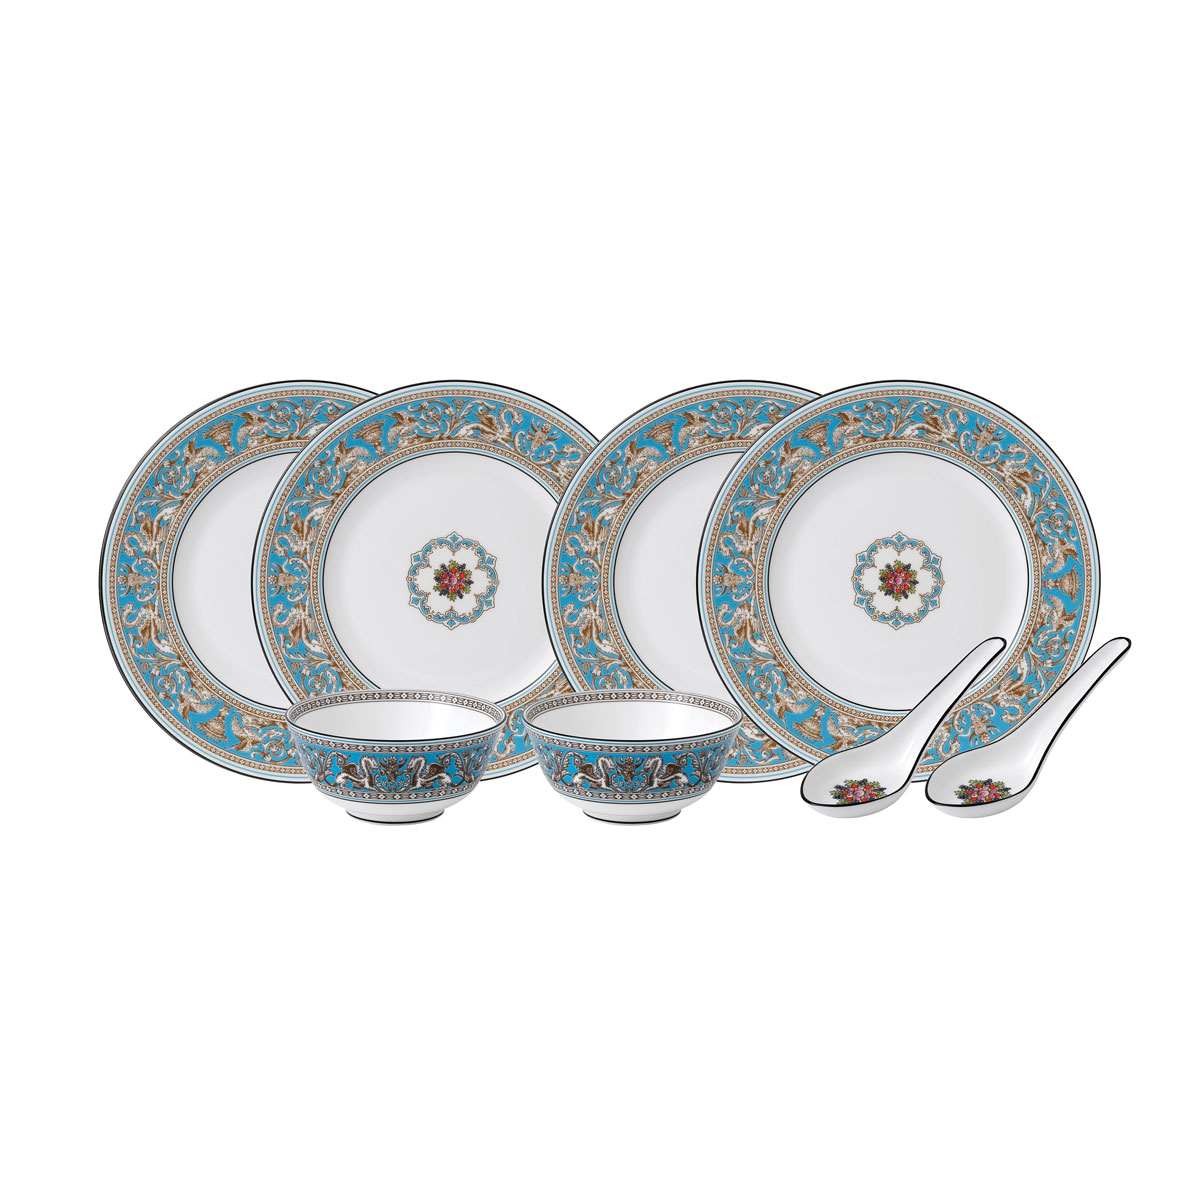 Wedgwood Florentine China Turquoise Dining Set For Two With Spoons